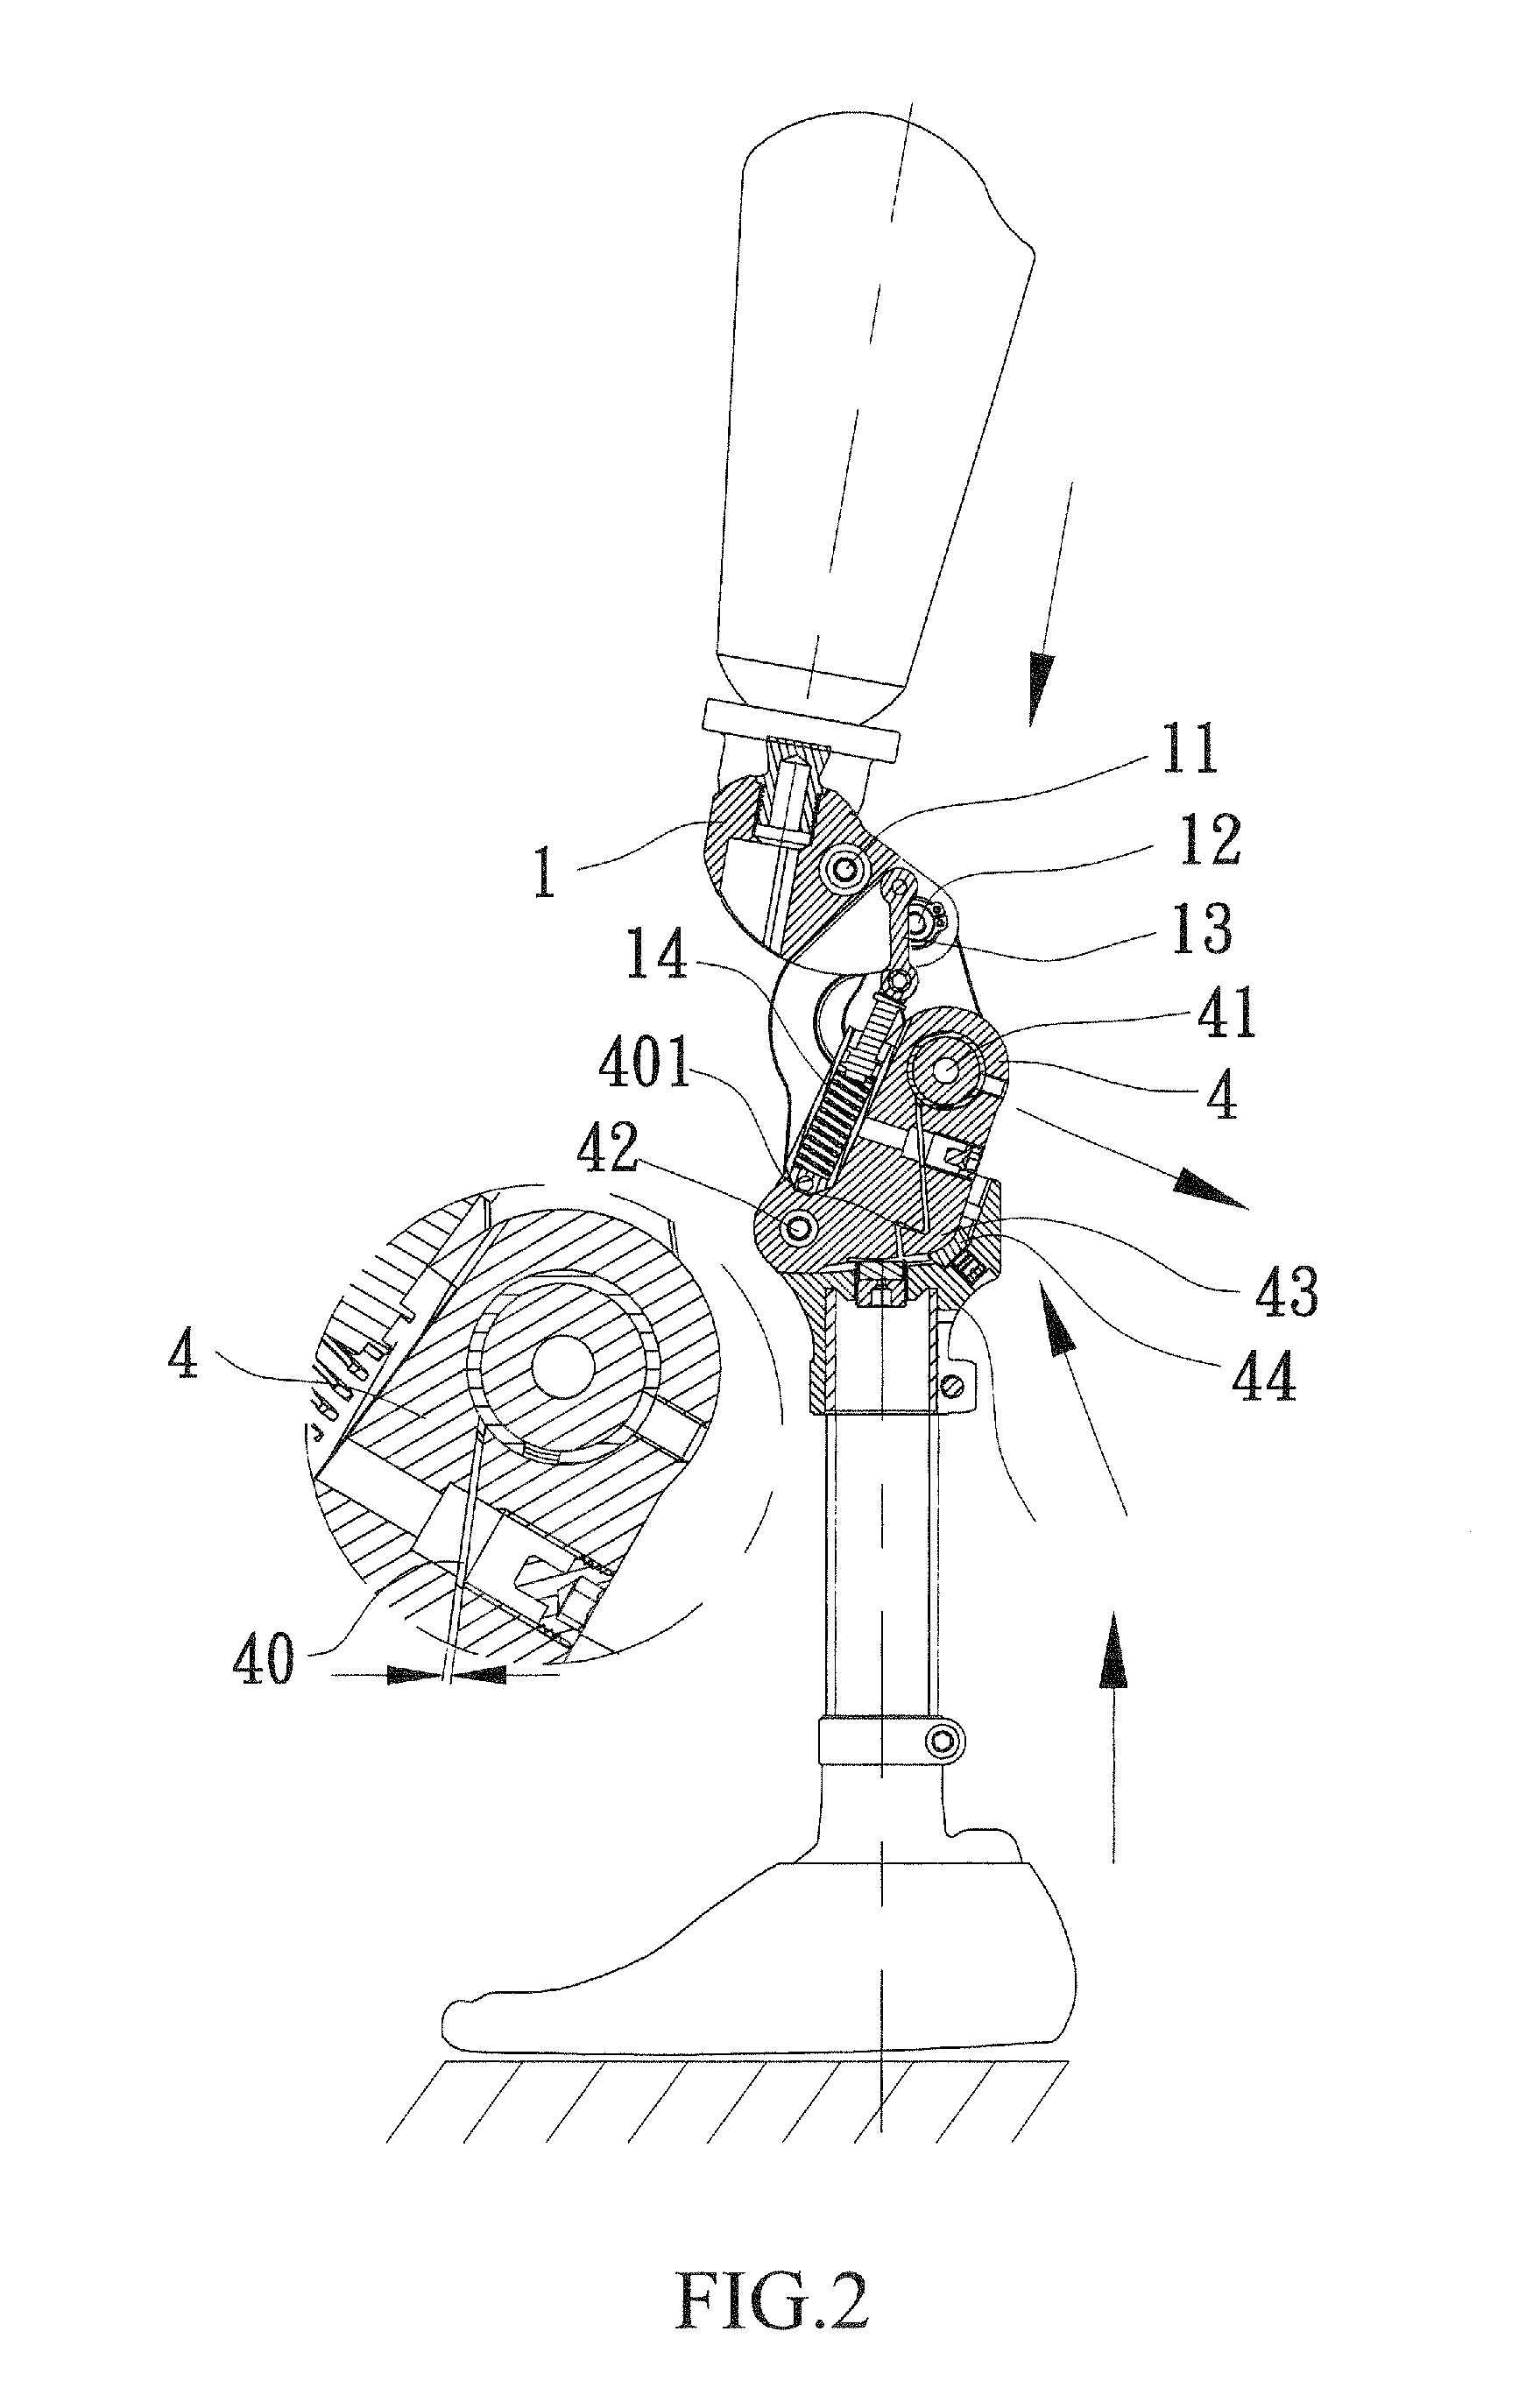 Four-bar-linkage brake-included knee joint